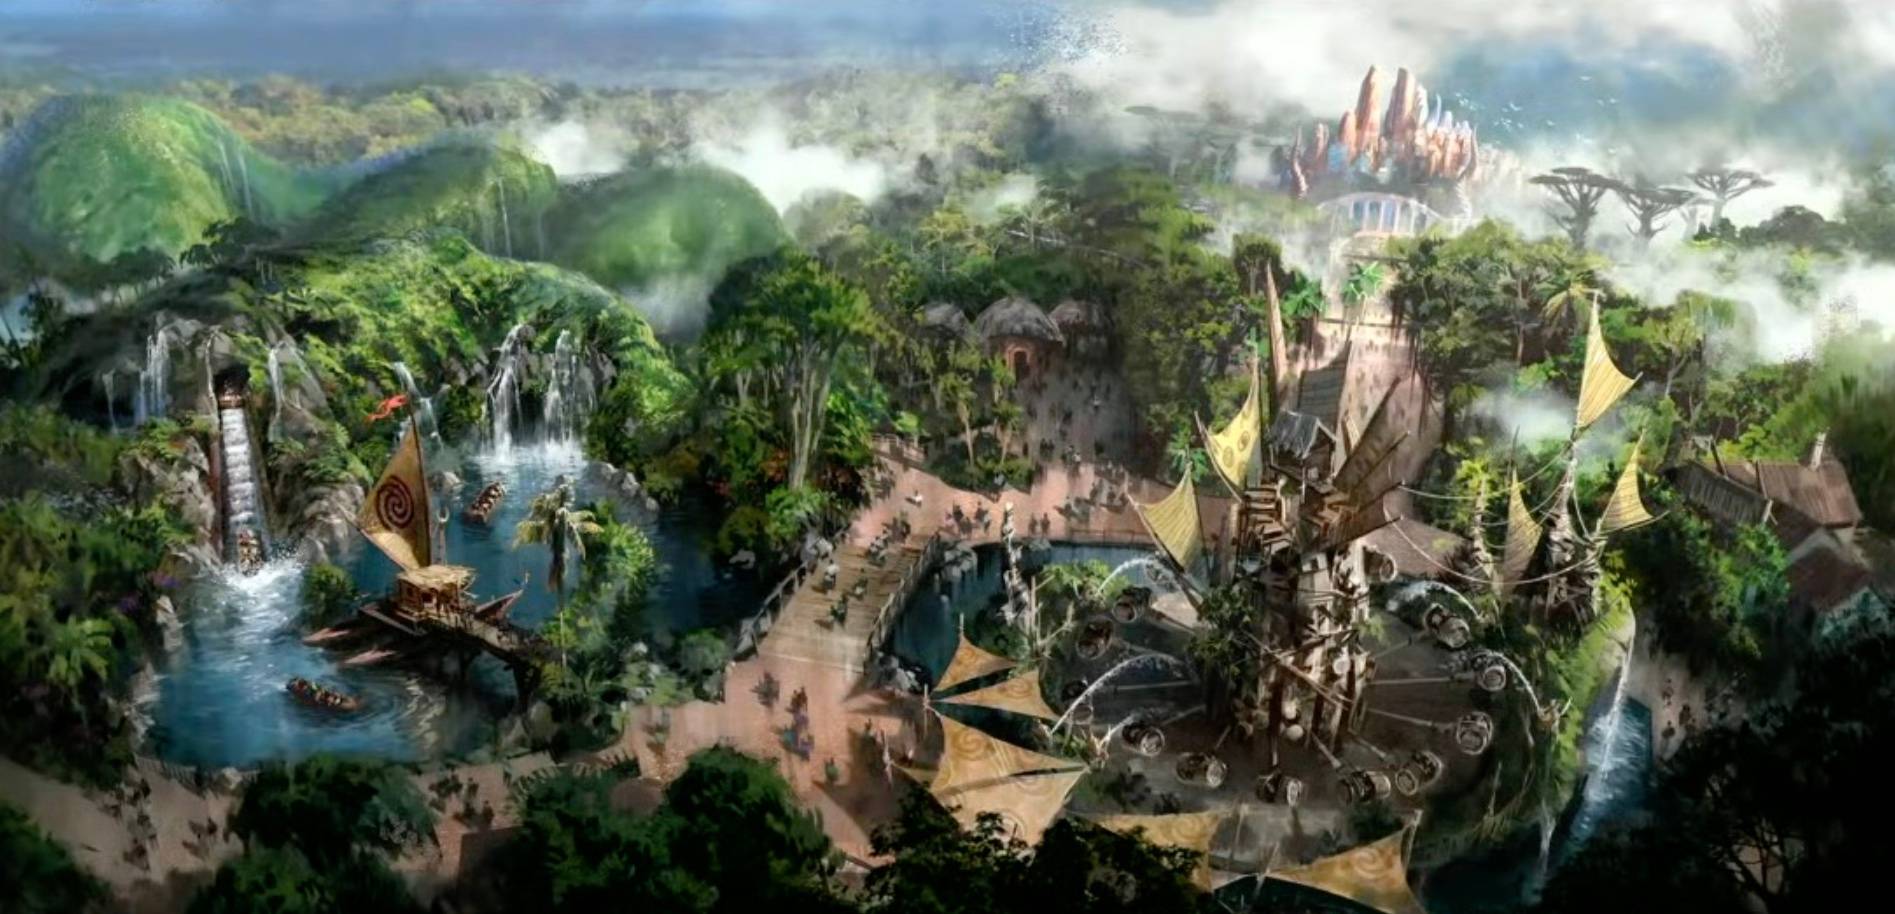 Zootopia and Moana Blue Sky concepts may be moving forward as senior Imagineers are spotted at Disney's Animal Kingdom